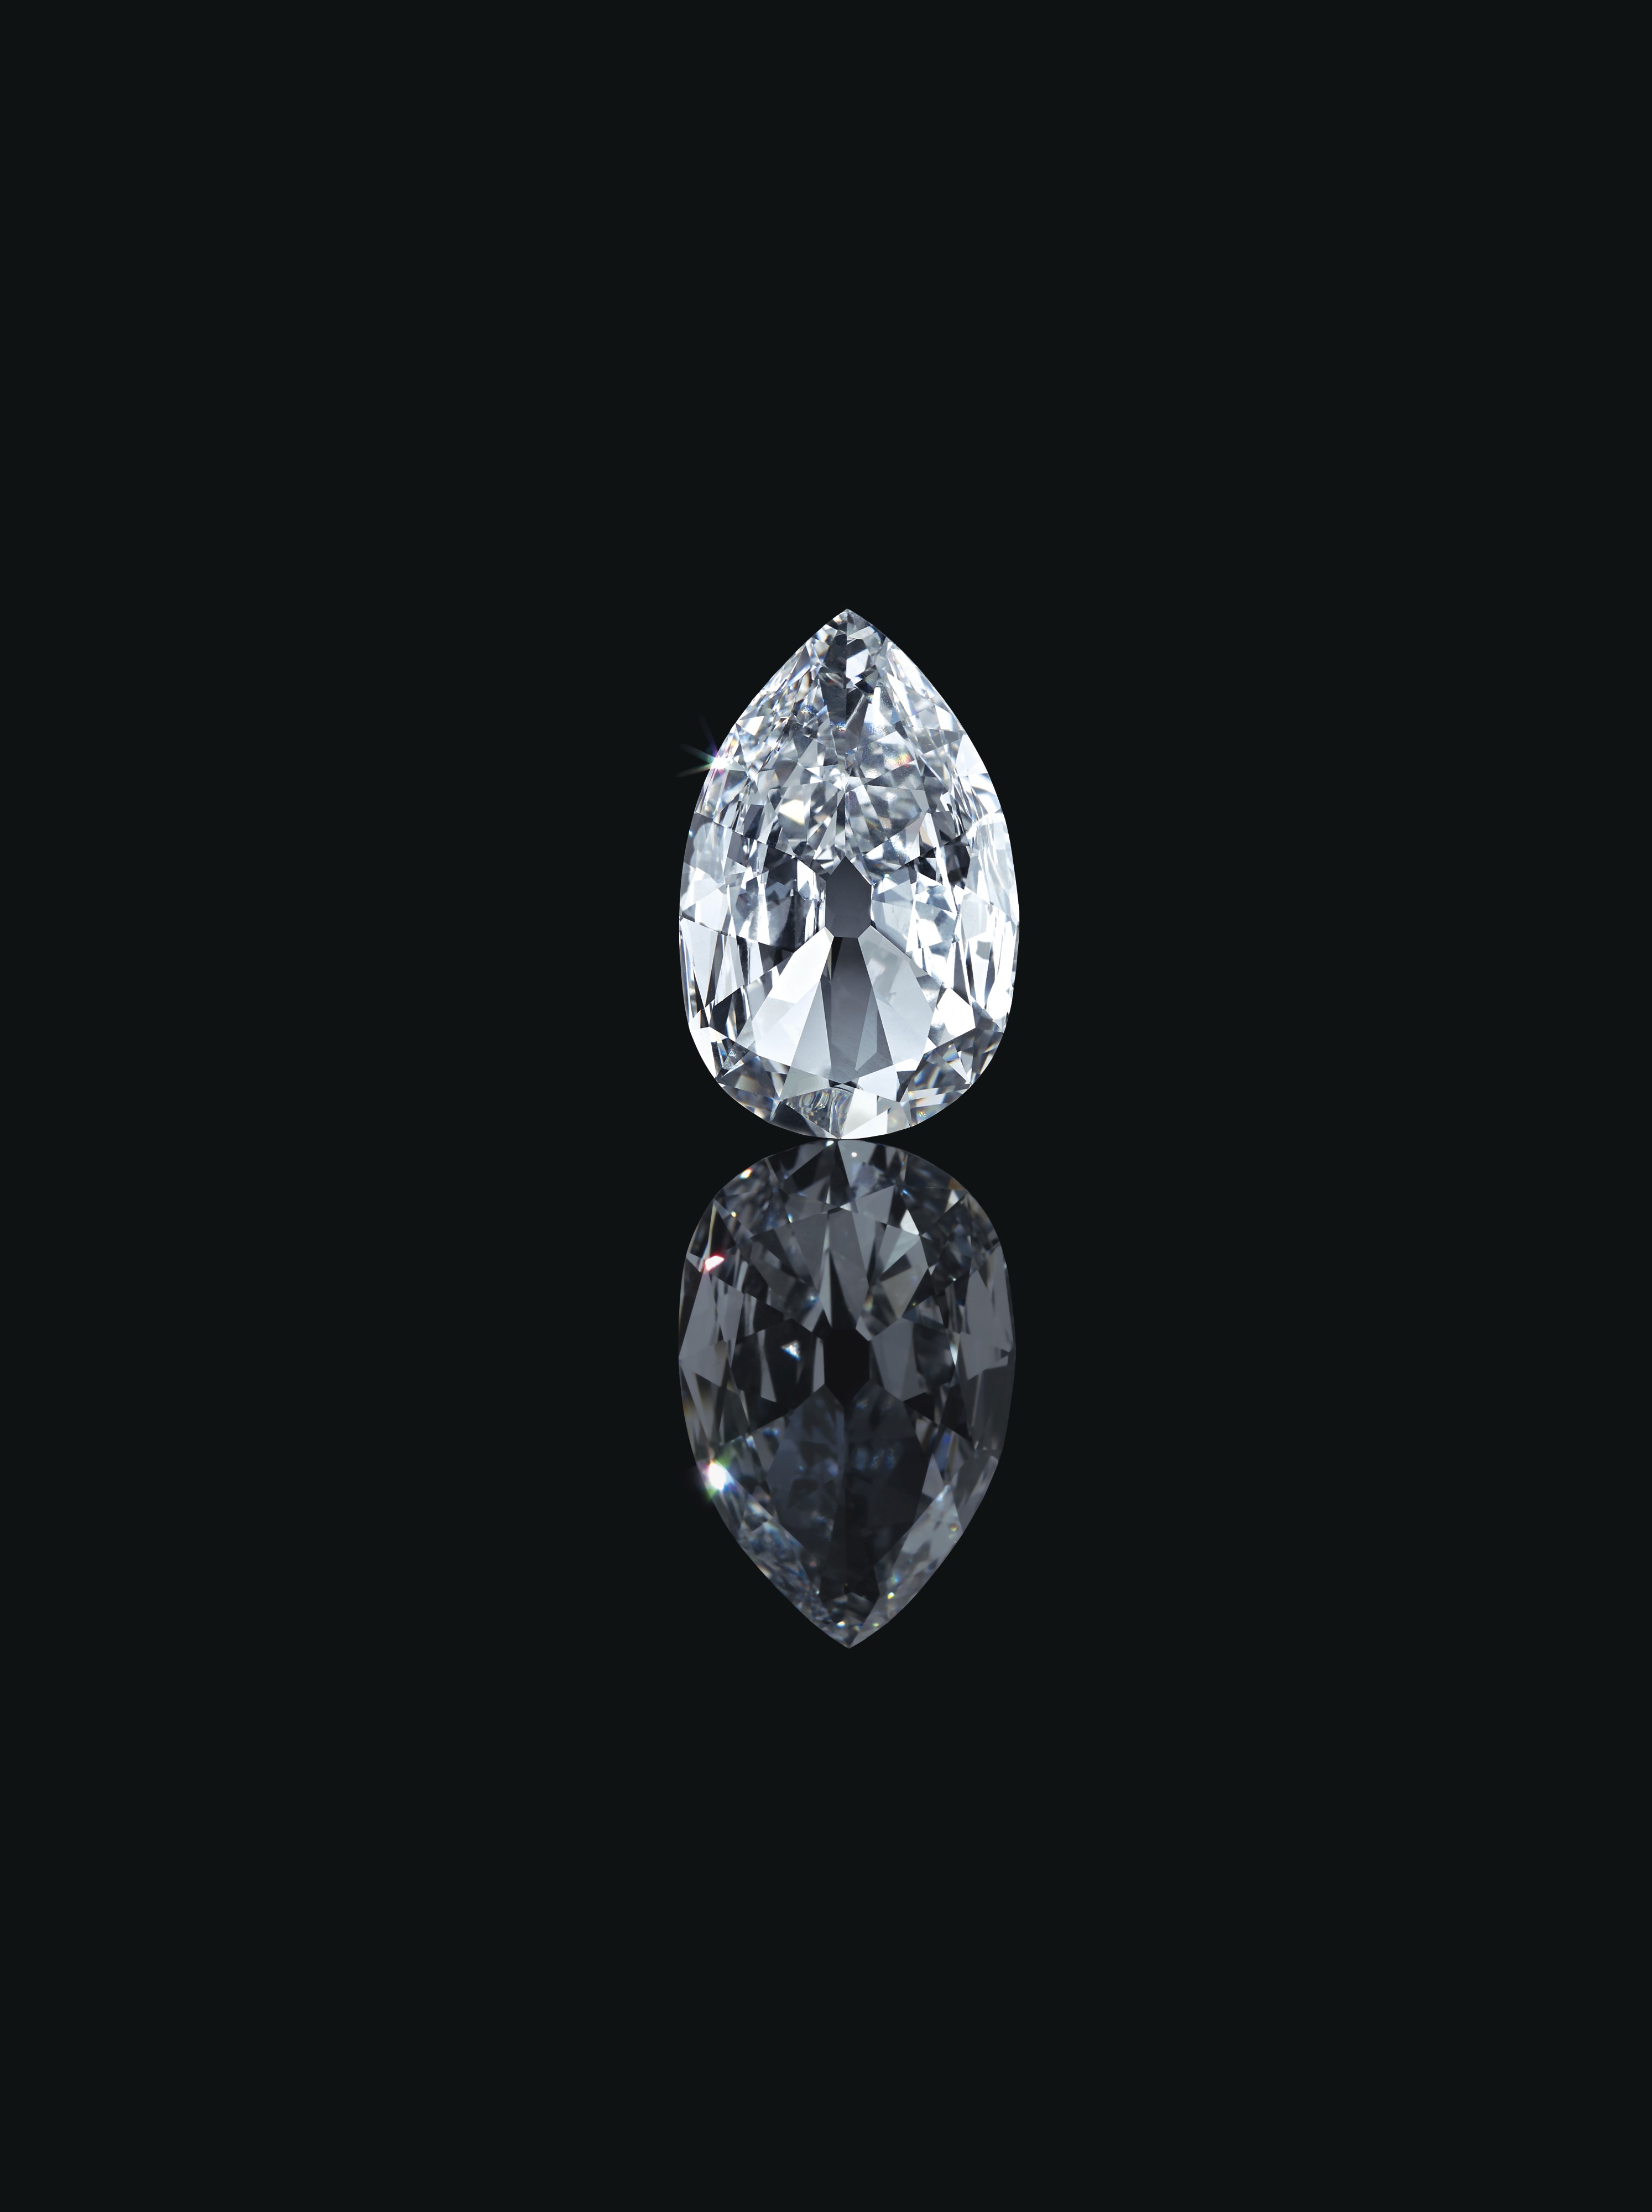 The Arcot Diamond from the Golconda mine, a brilliant-cut, pear-shaped, D-colour stone weighing 17.21 carats, was one of two such diamond ear drops sent as gifts to Queen Charlotte (1744-1818), the wife of King George III, from the Nawab of Arcot. The diamonds were later acquired at auction by the Marquess of Westminster and subsequently mounted in the Westminster Tiara, which was worn at the coronation of Queen Elizabeth II. The diamond sold for $3,375,000.